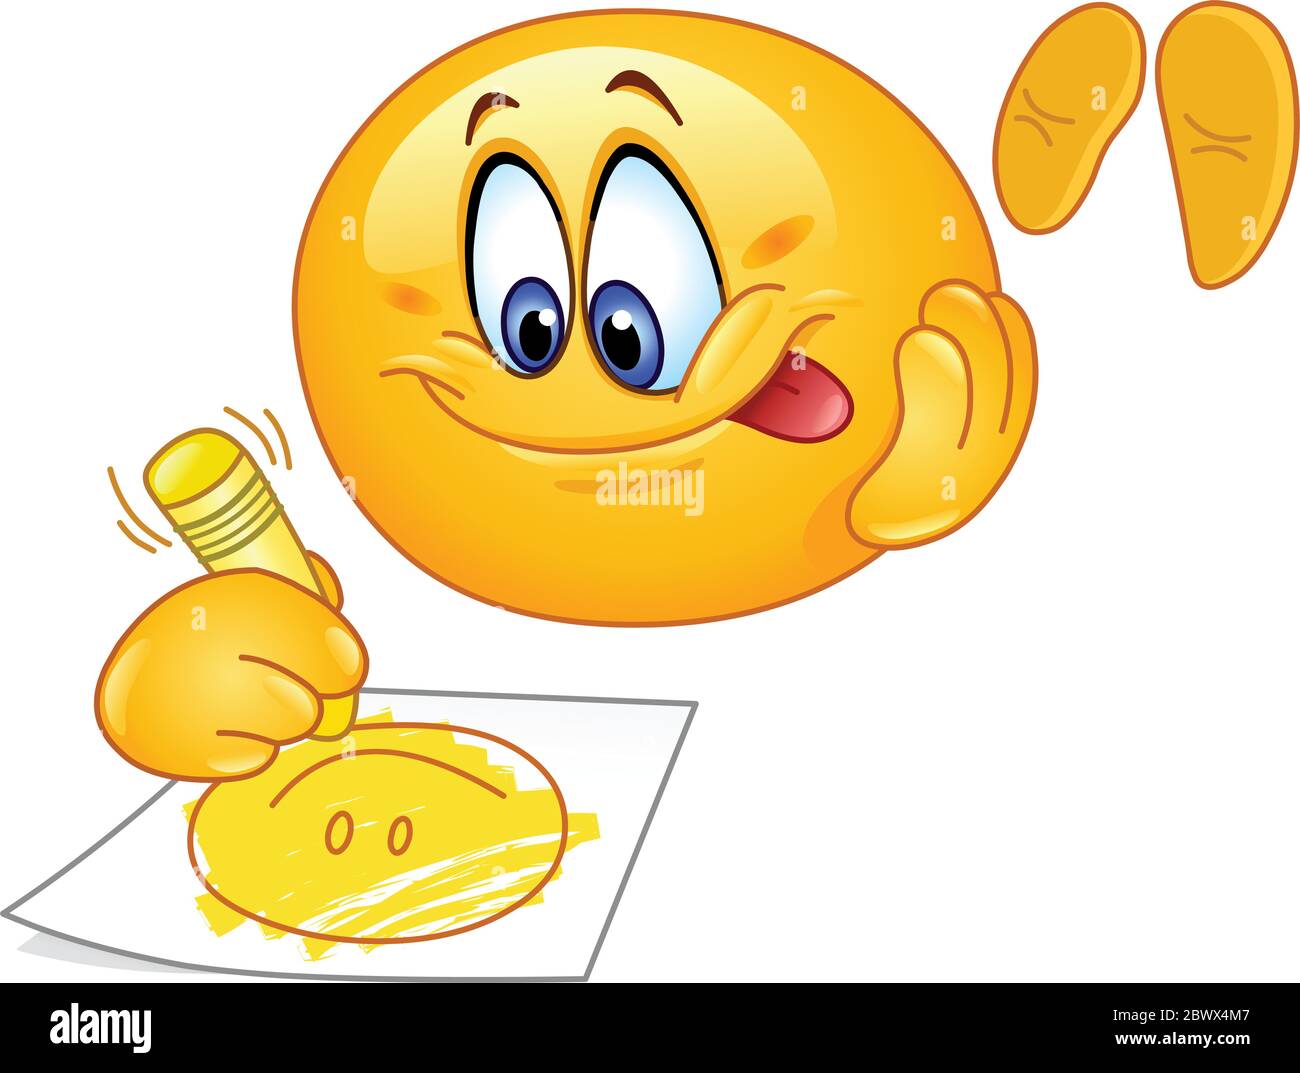 Cute emoticon drawing a smiling face Stock Vector